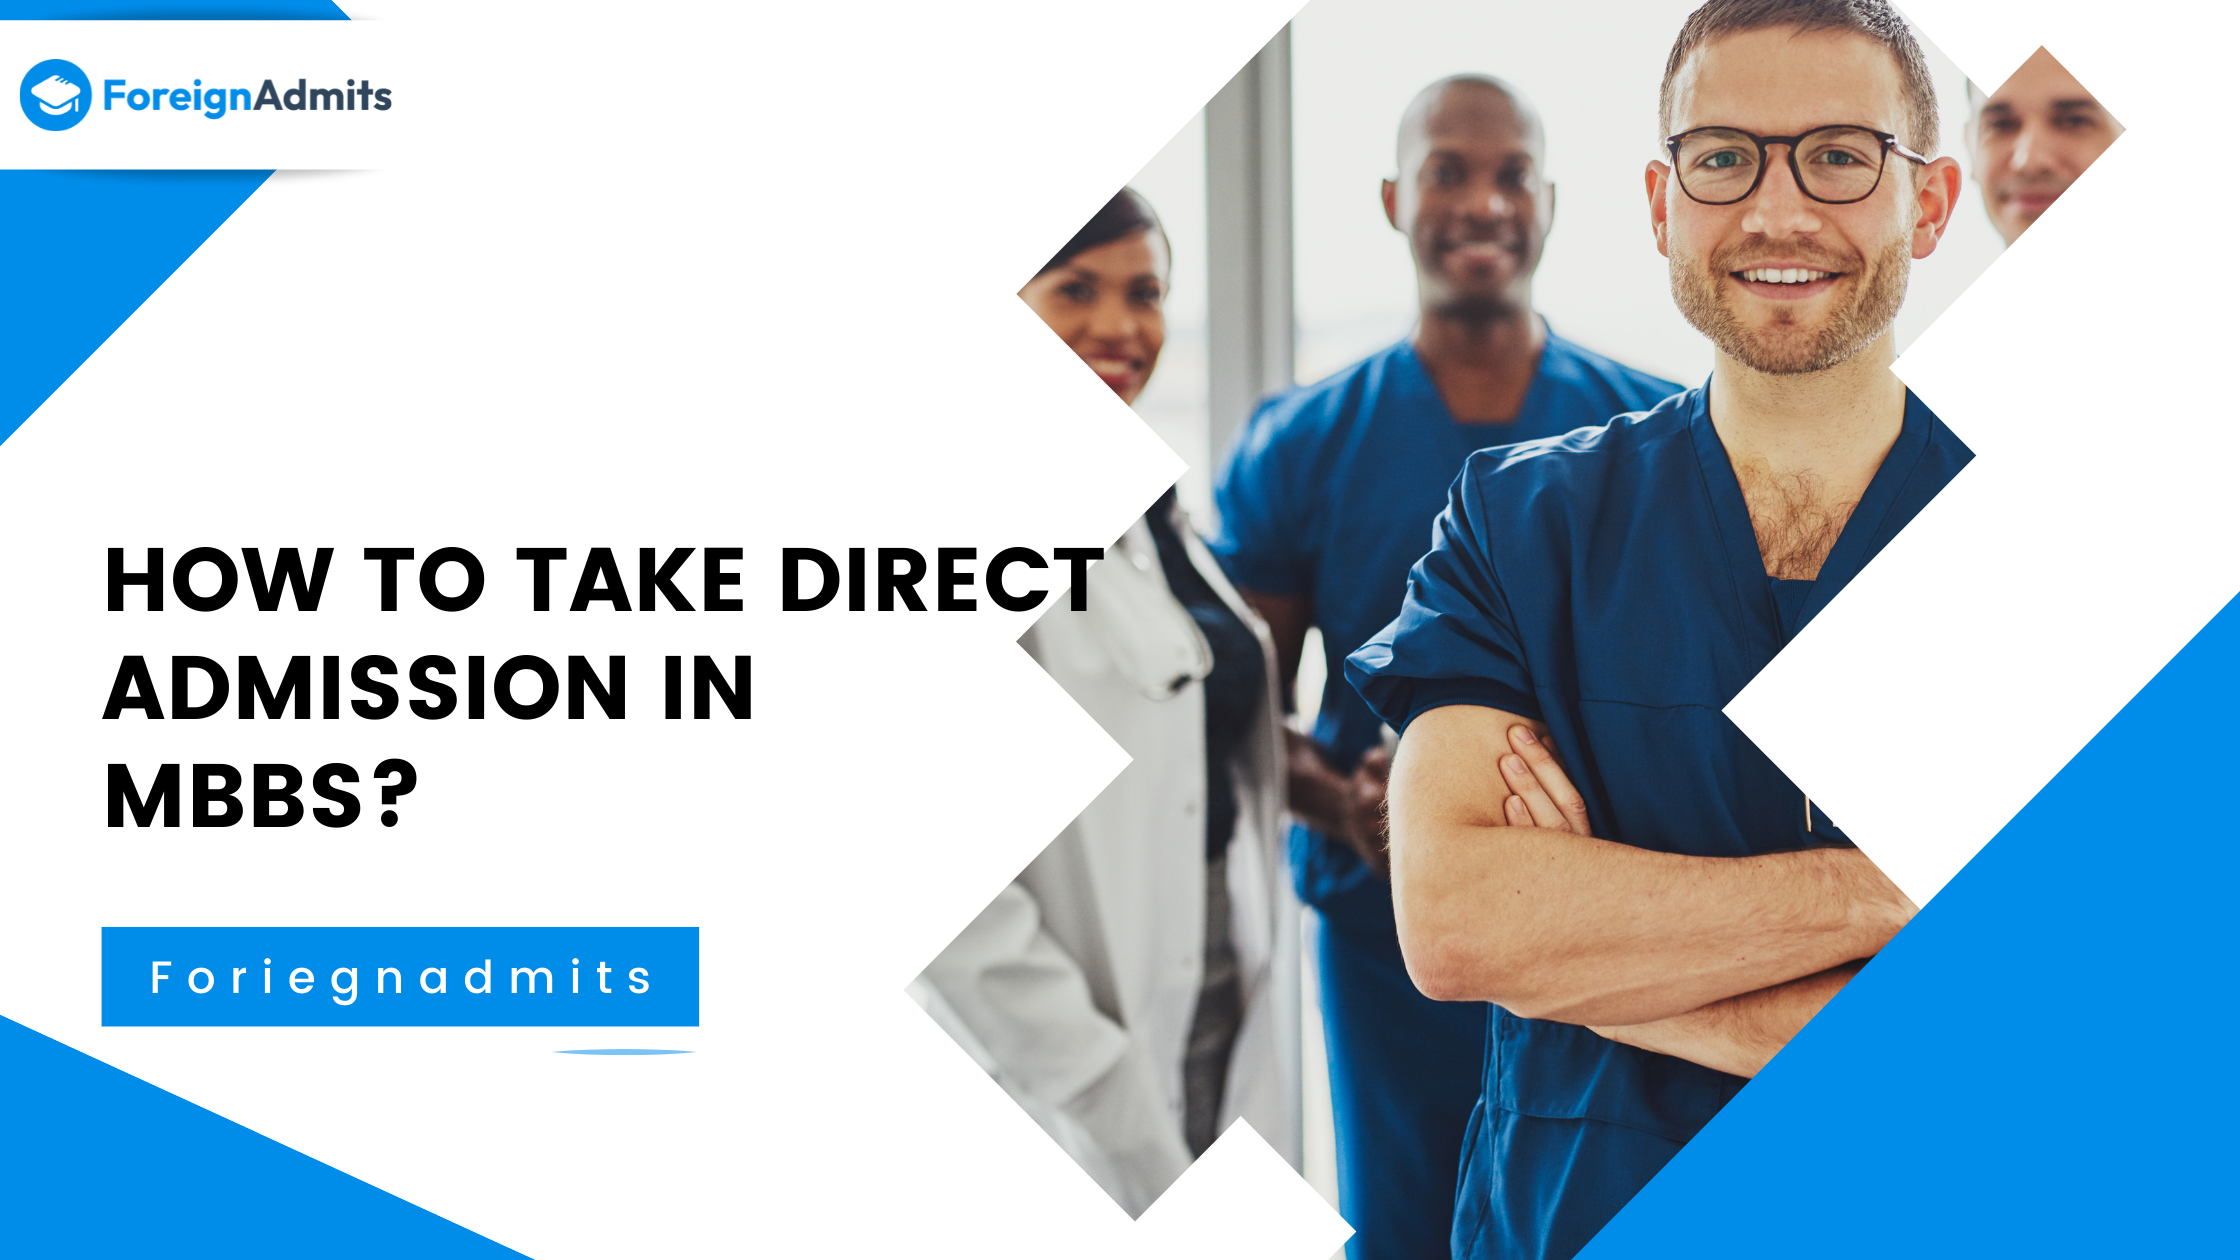 How to take direct admission in MBBS?